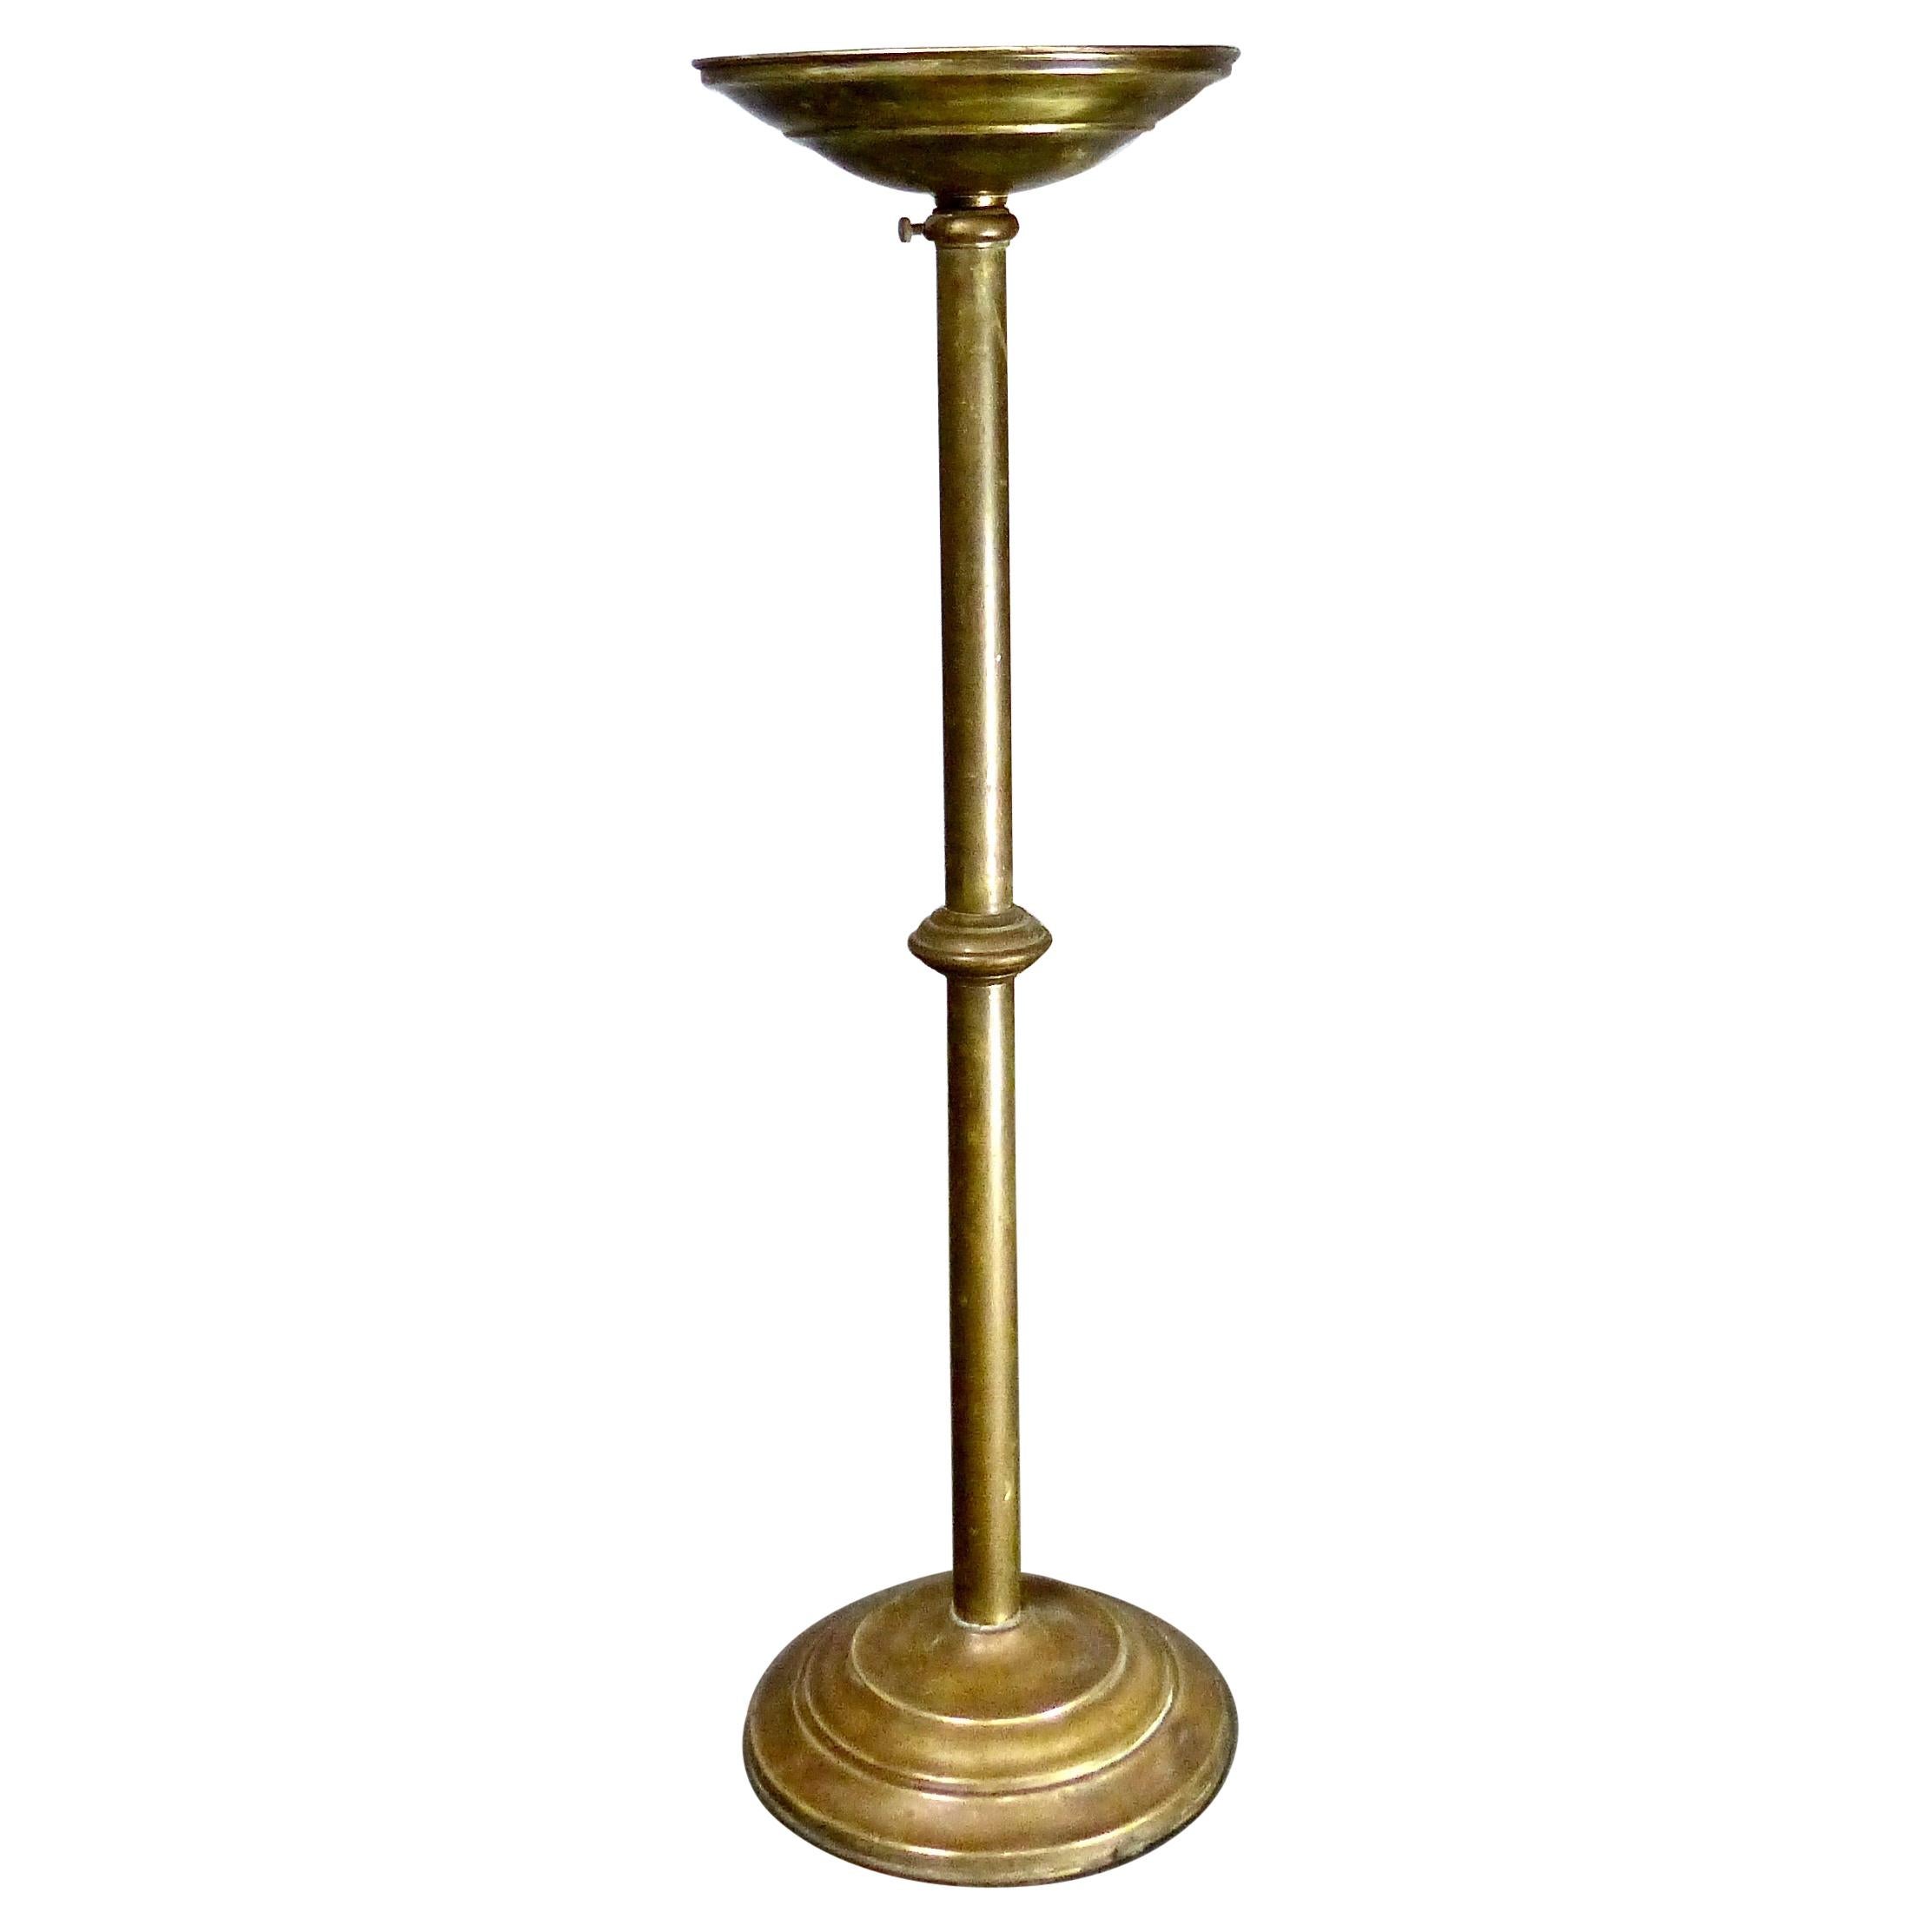 Brass Extendable Plant Display Stand, circa 1900